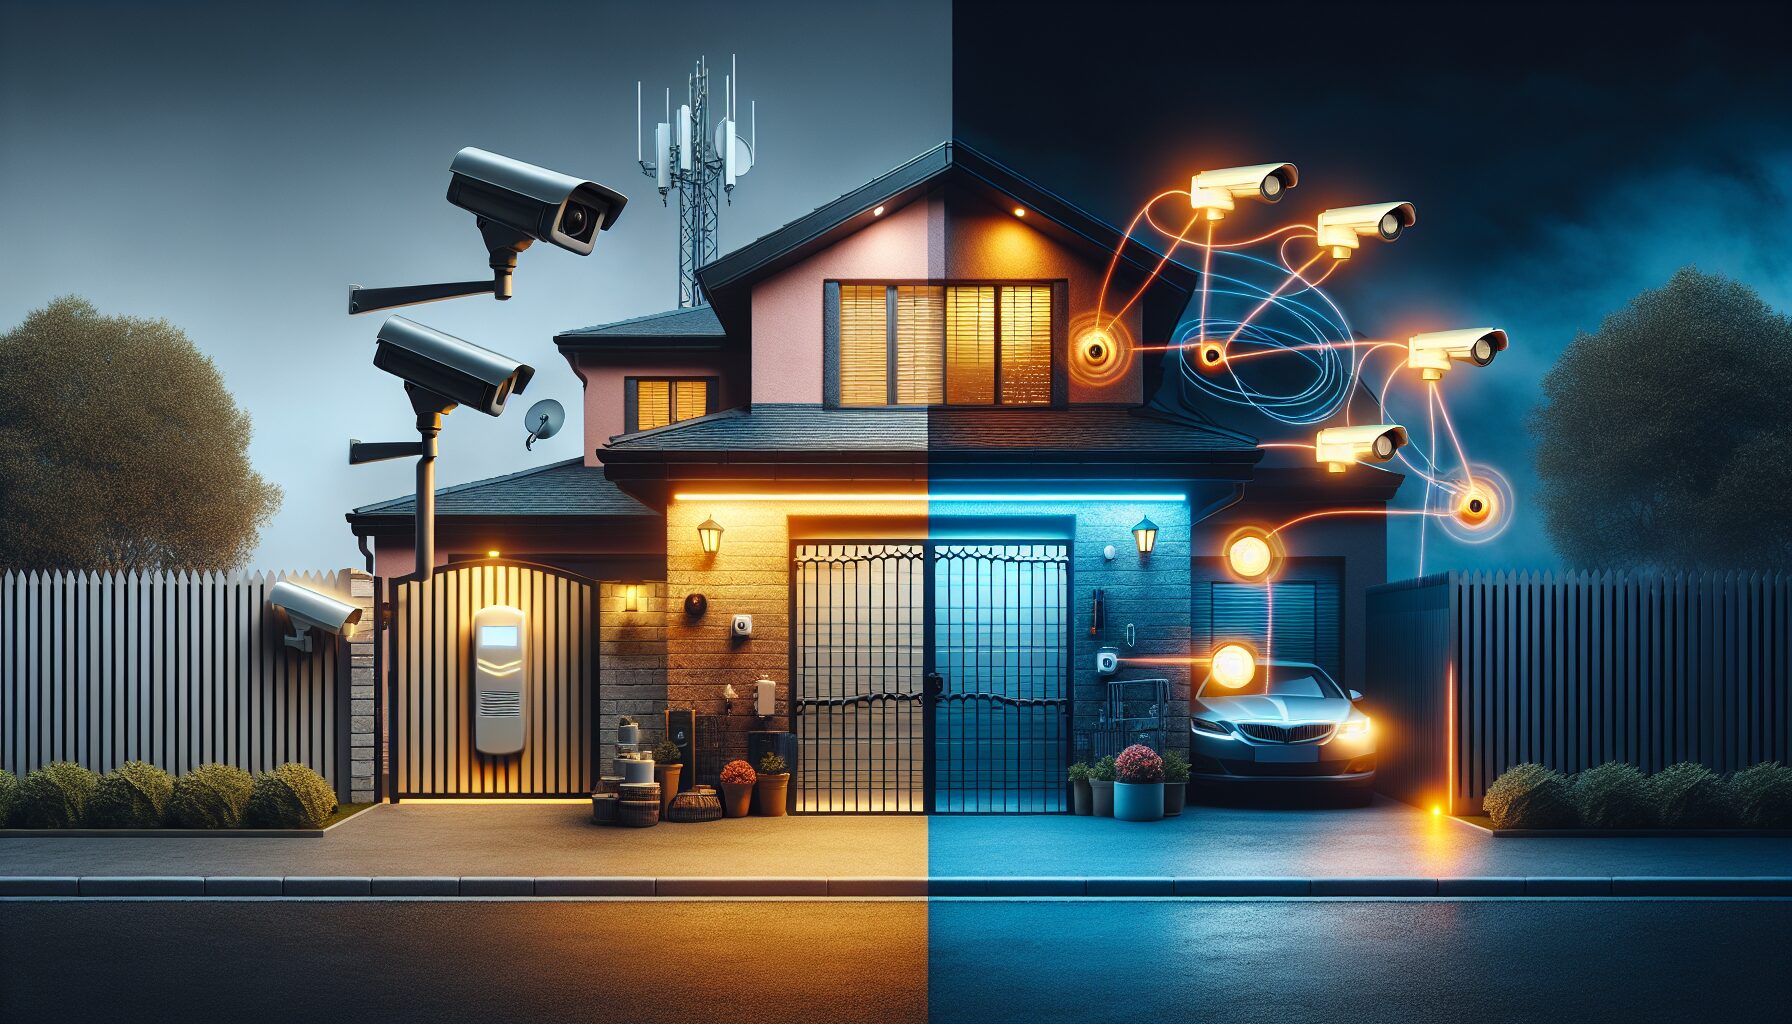 Illustration comparing hidden versus visible security measures for home protection